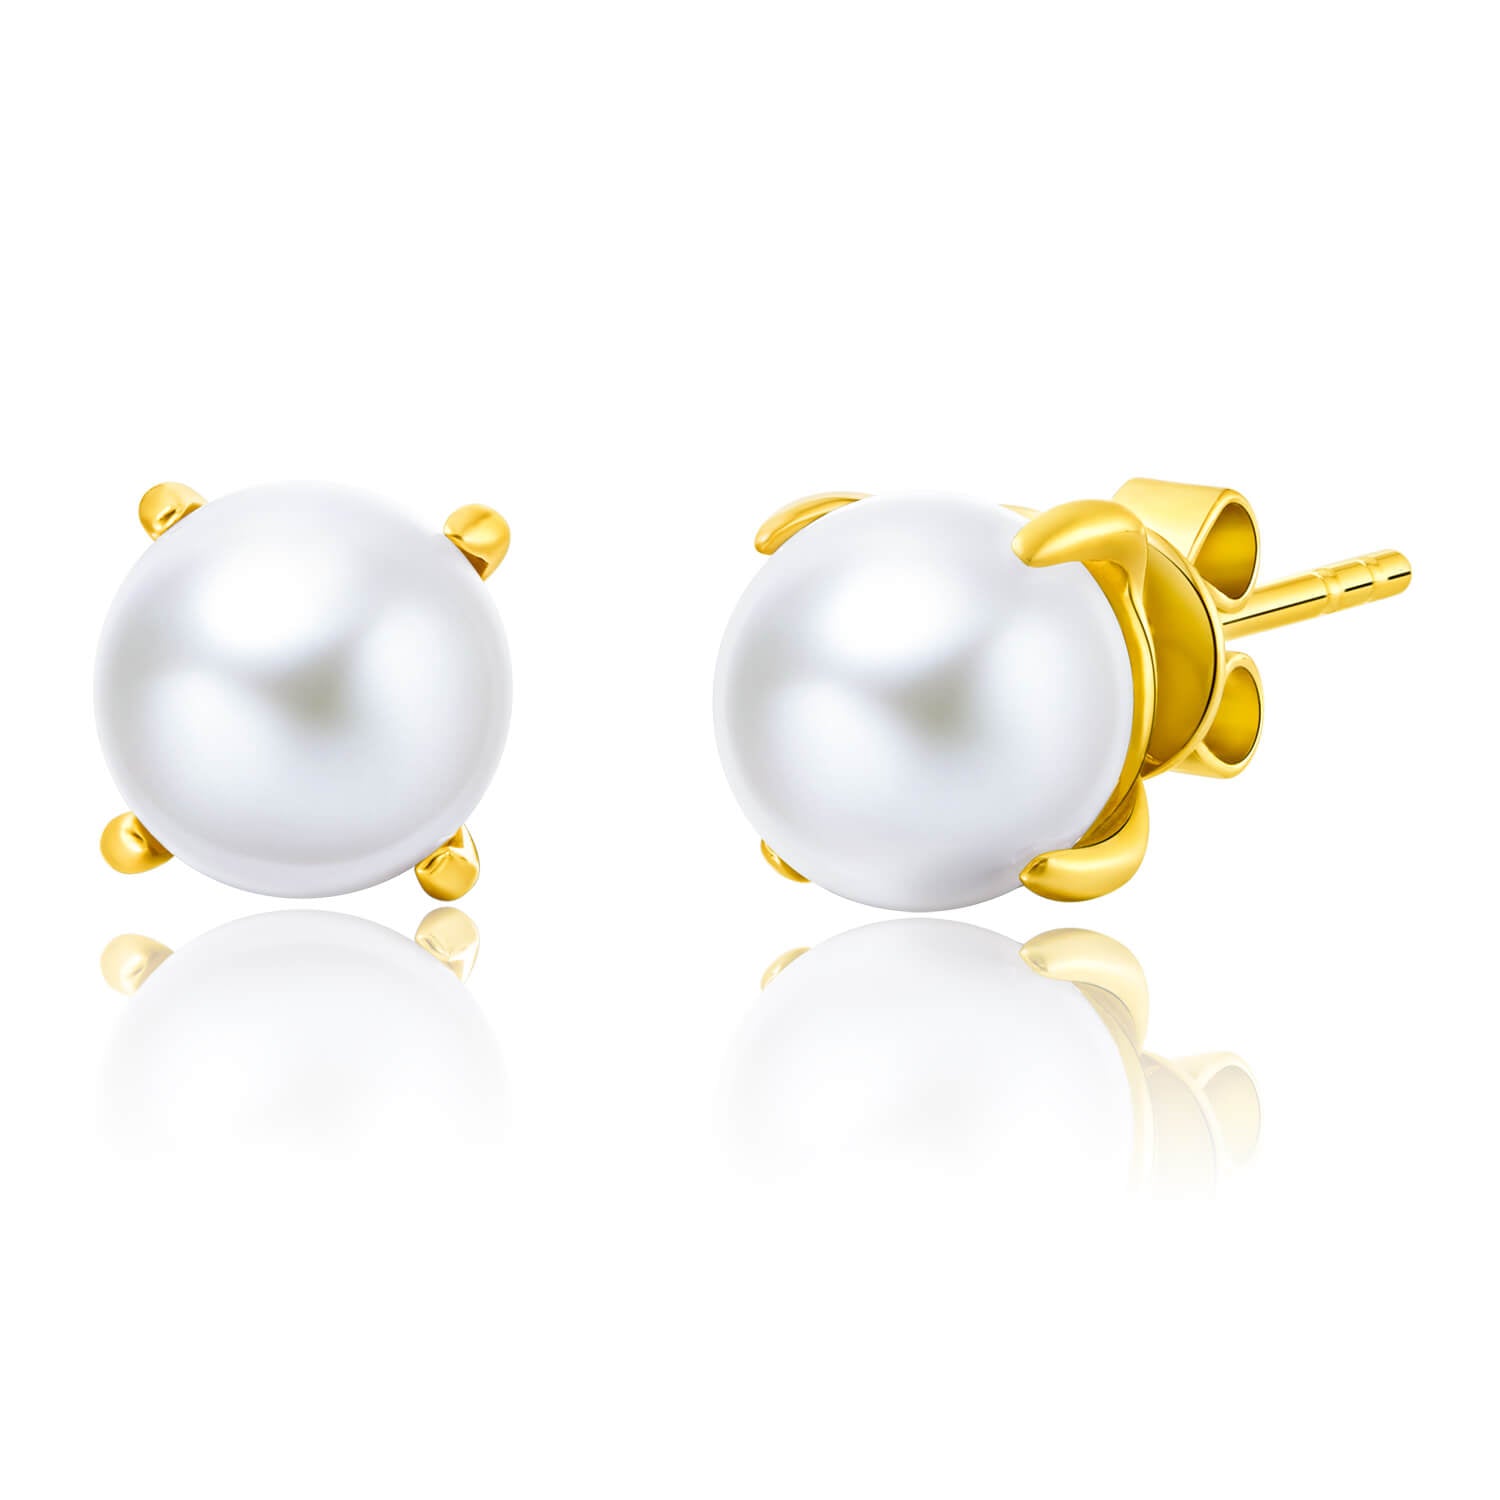 MOLAH Gold Plated 925 Silver Cultured Freshwater Pearl Stud Earrings